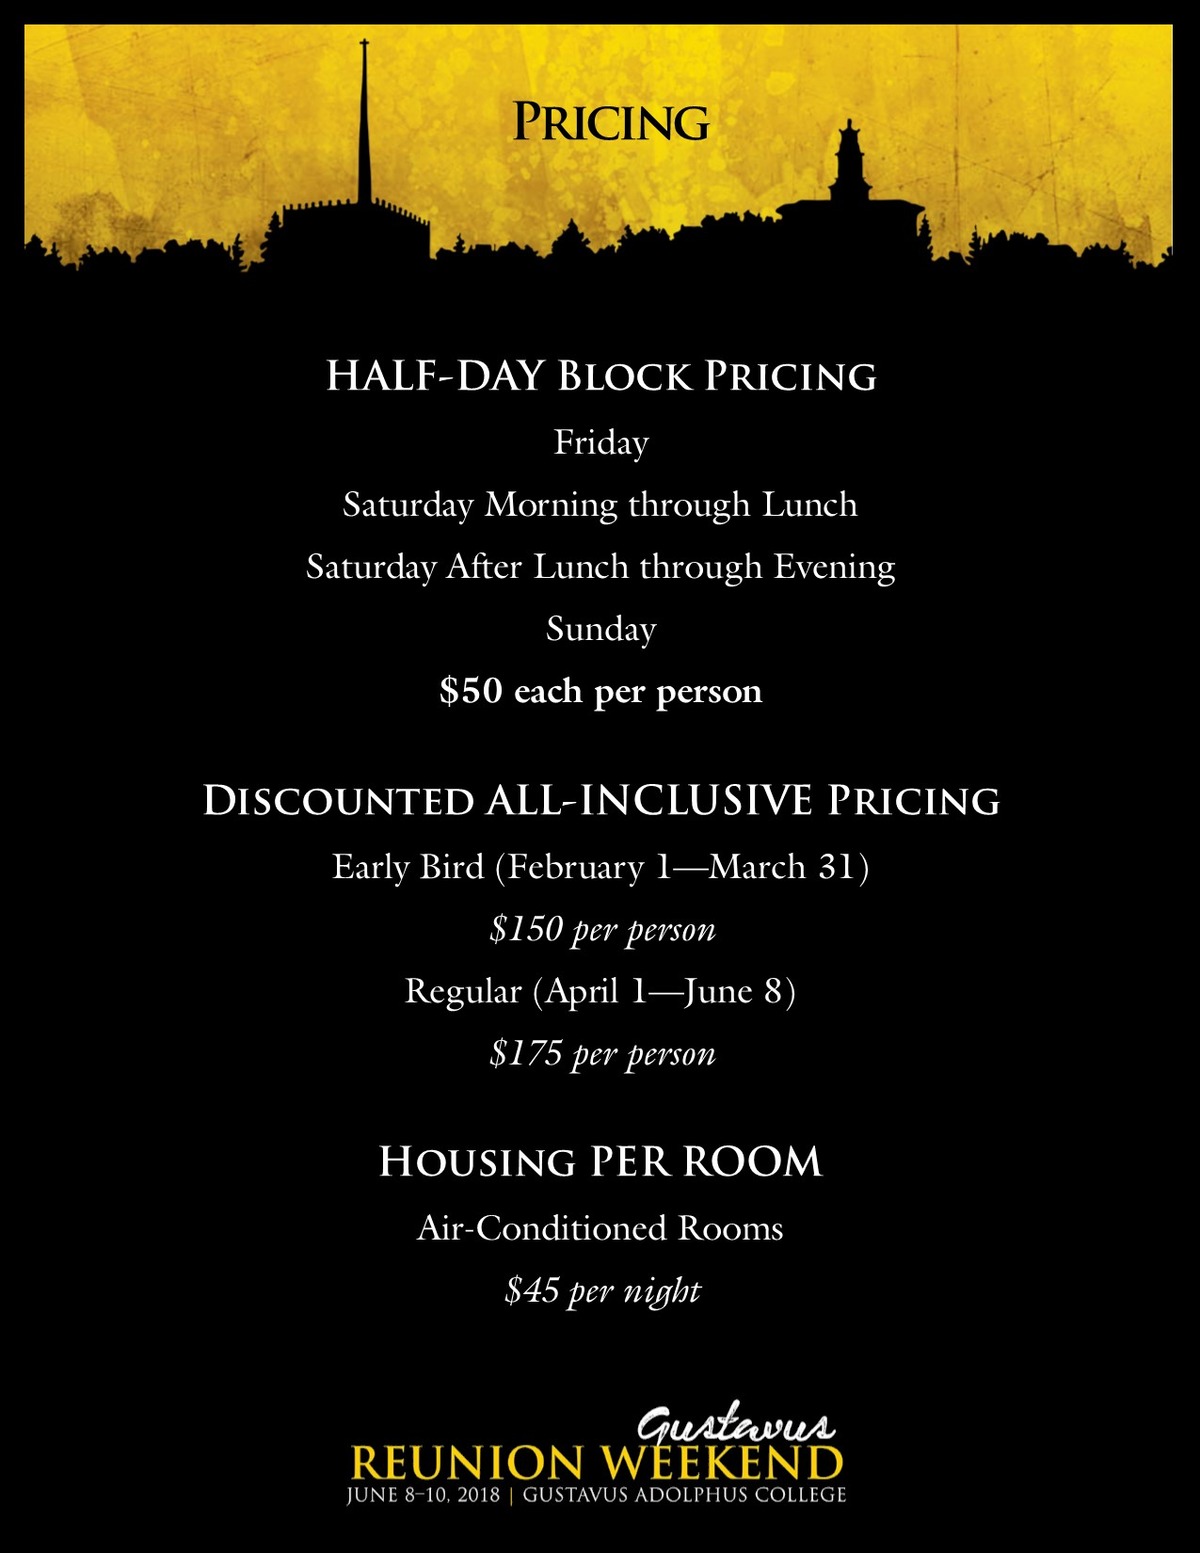 Class specific Reunion Weekend pricing information